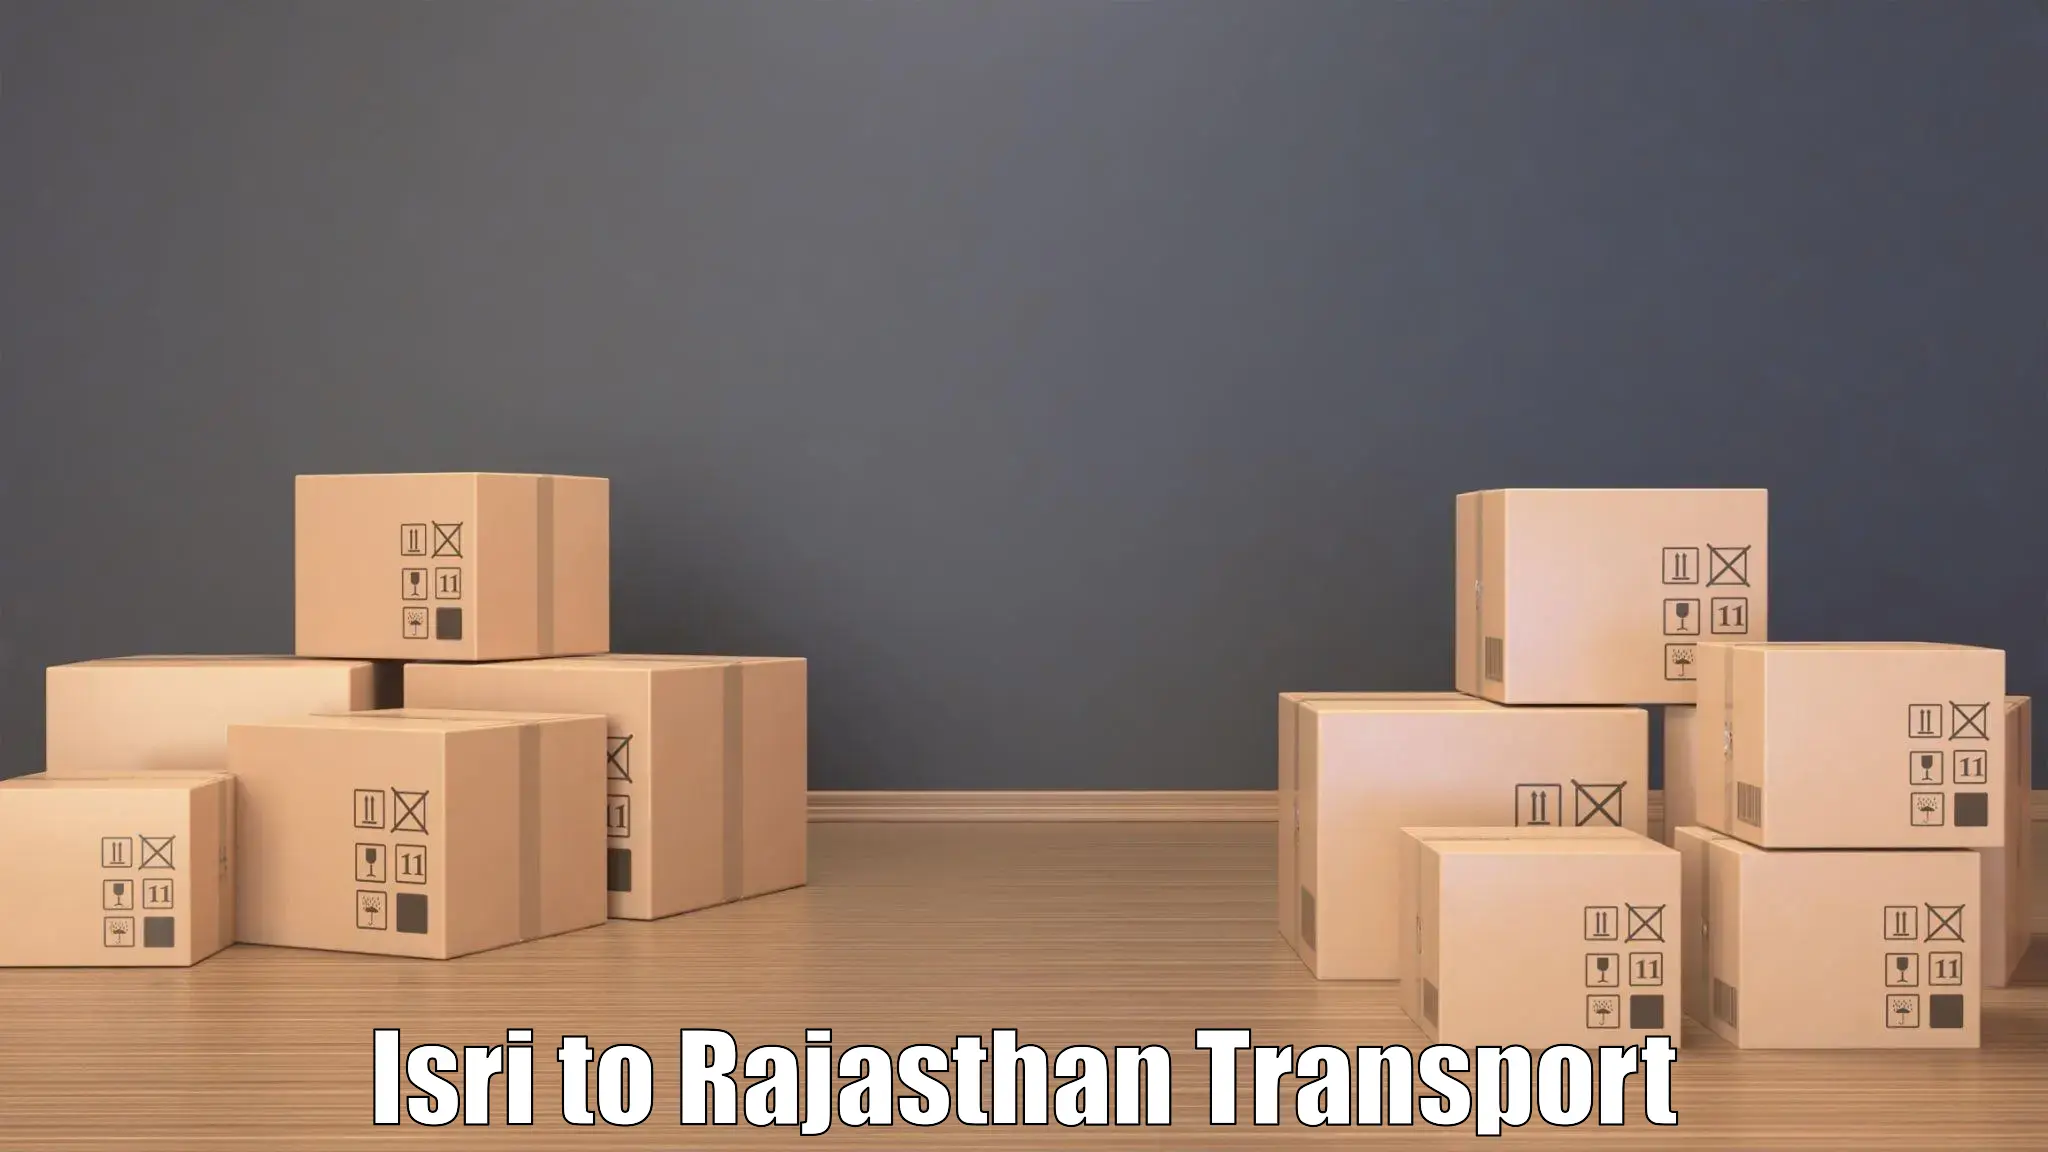 Two wheeler transport services Isri to Bansur